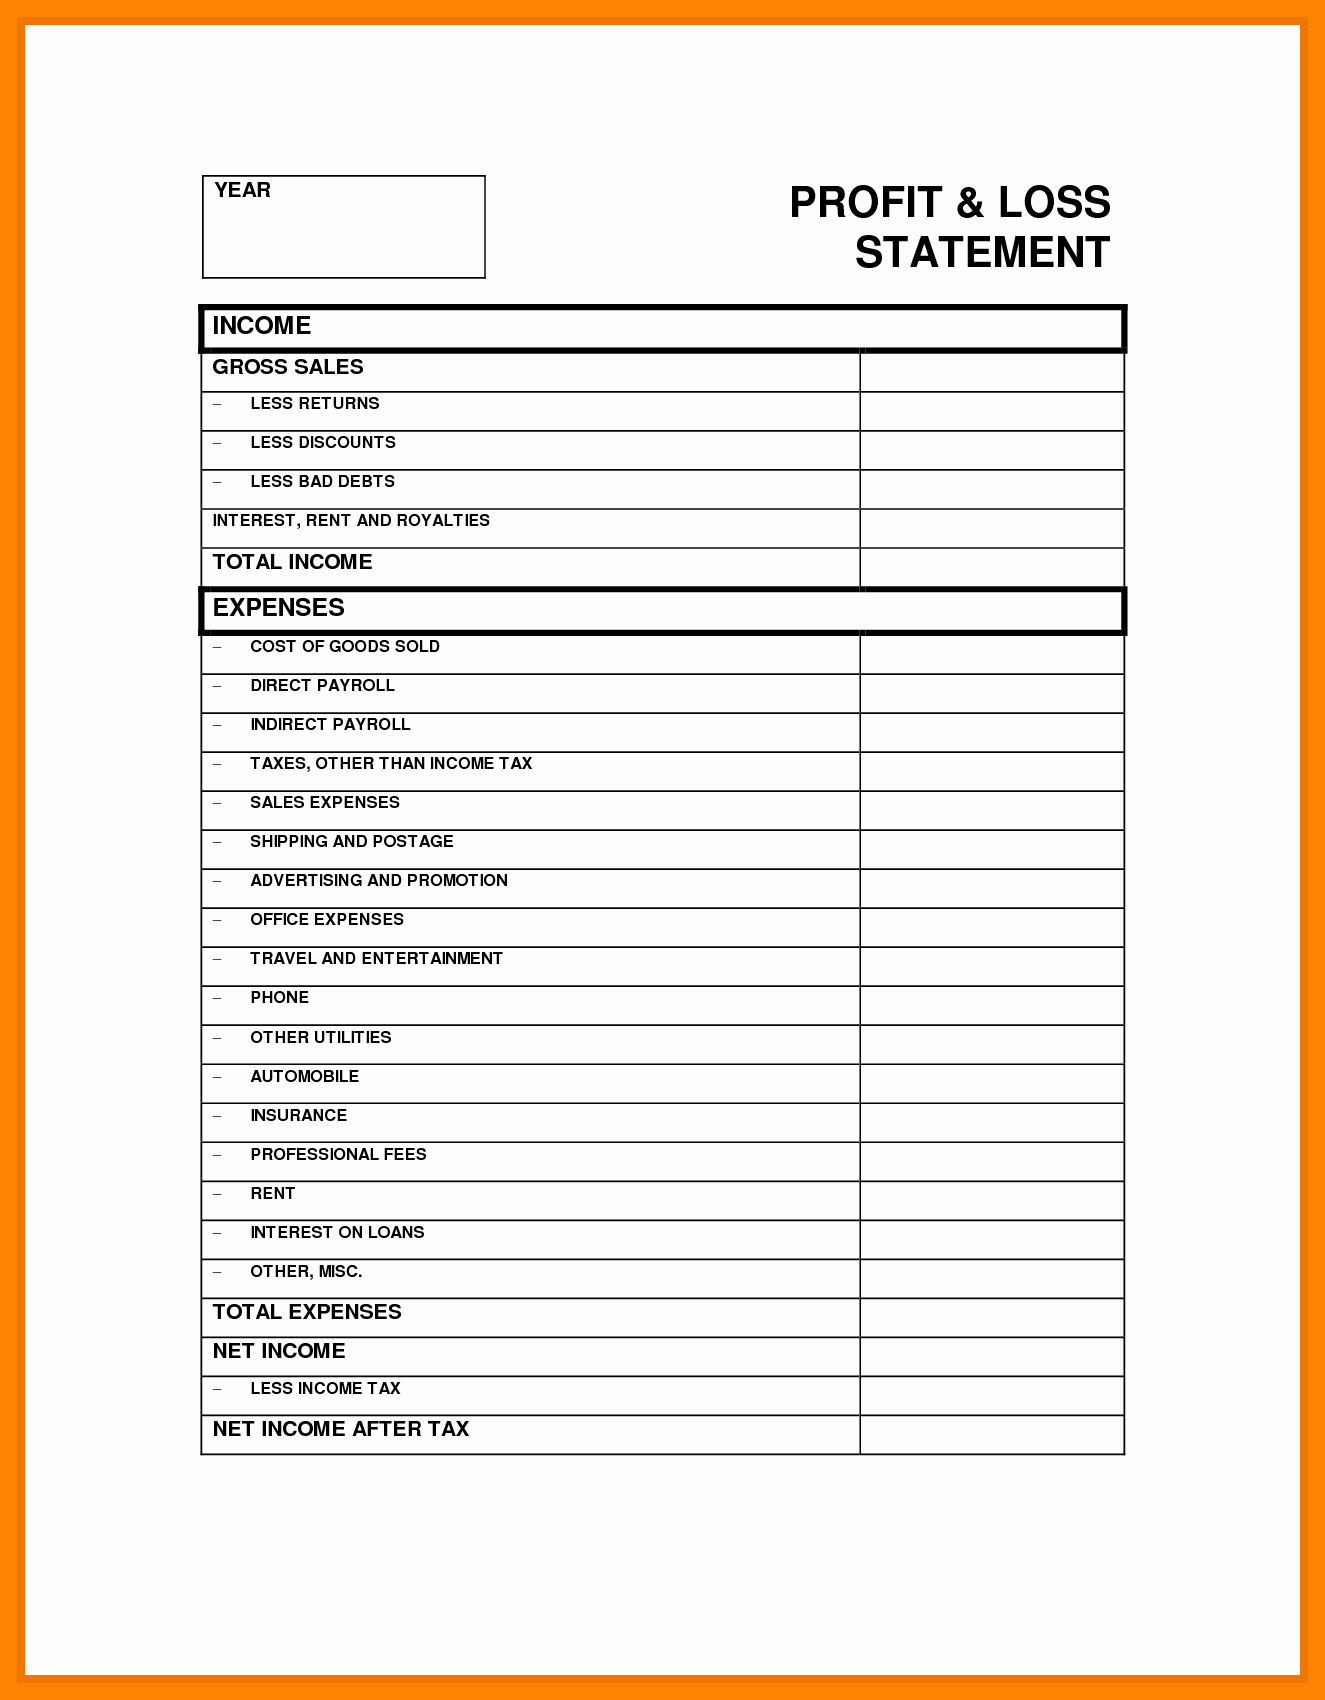 Printable Profit and Loss Statement New Free Profit Loss Statement Statement Trakore Document